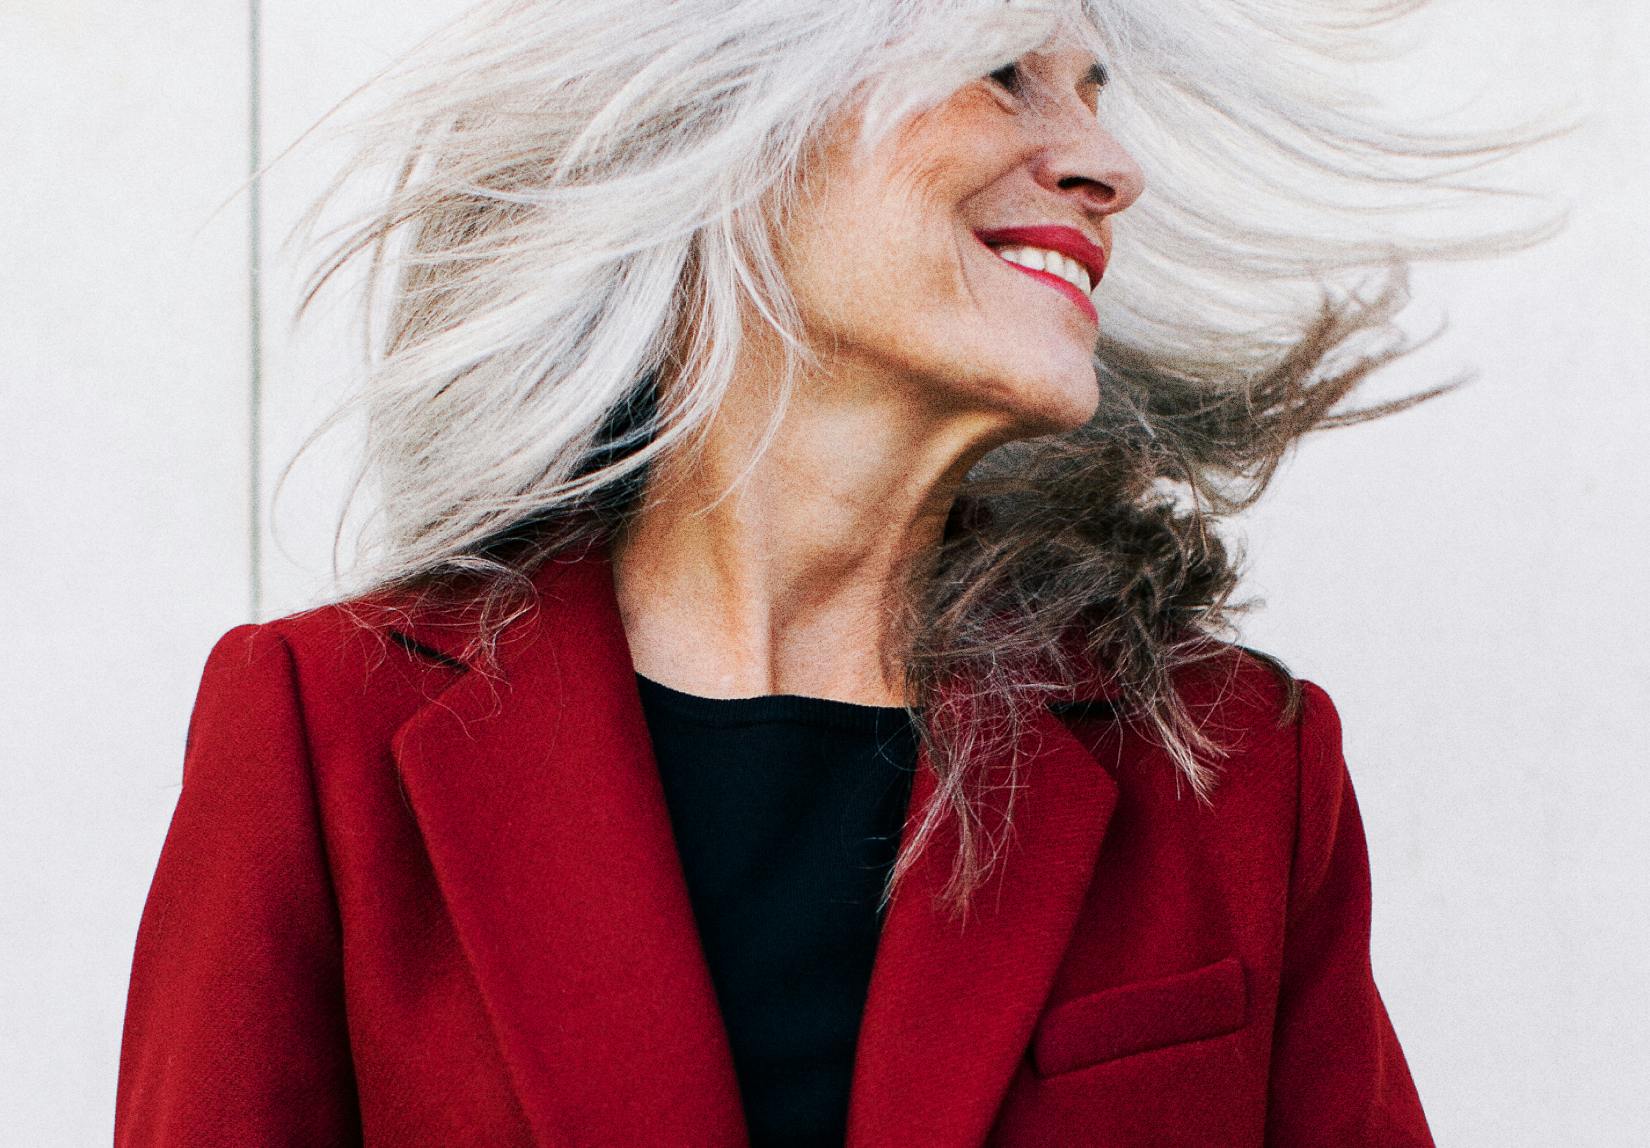 Portrait Of A Mature Woman With Grey Long Hair In Movement